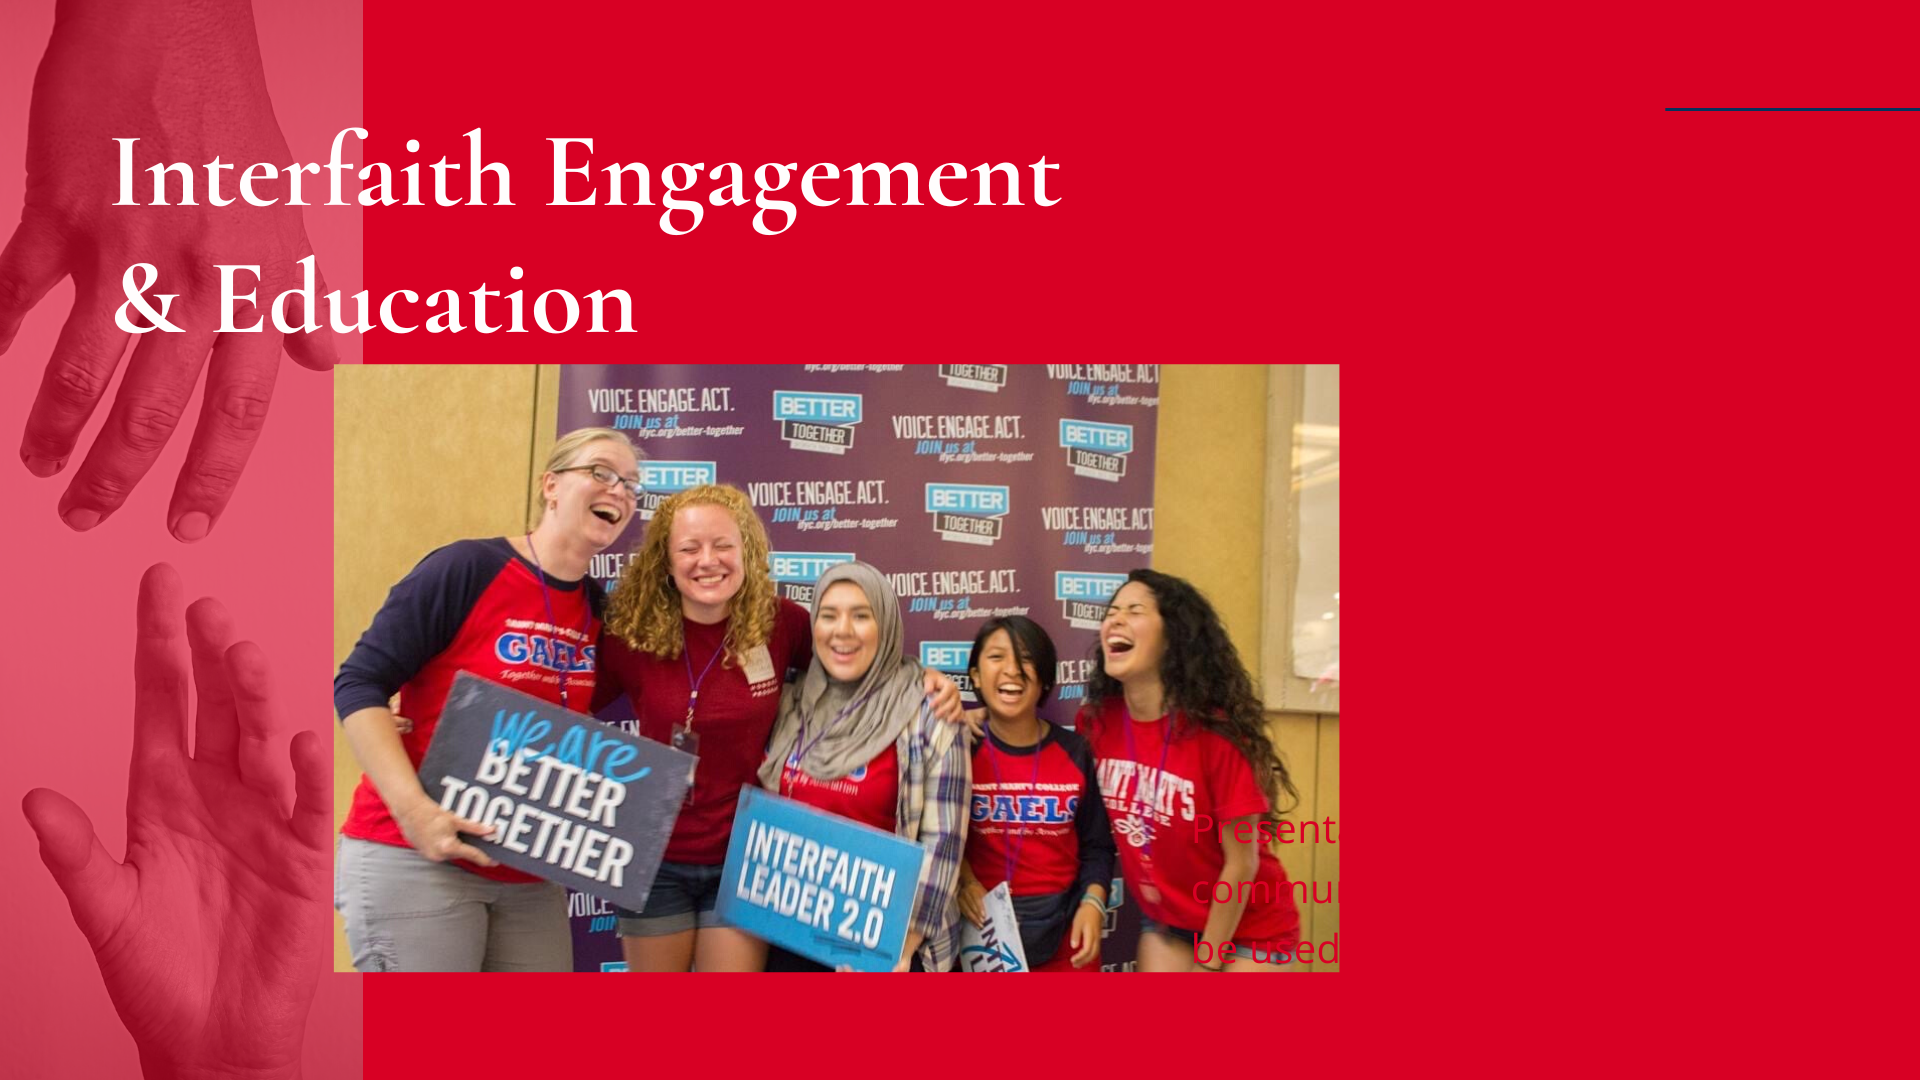 Red banner image with the words "Interfaith Engagement and Education" and an image of staff and students at a conference